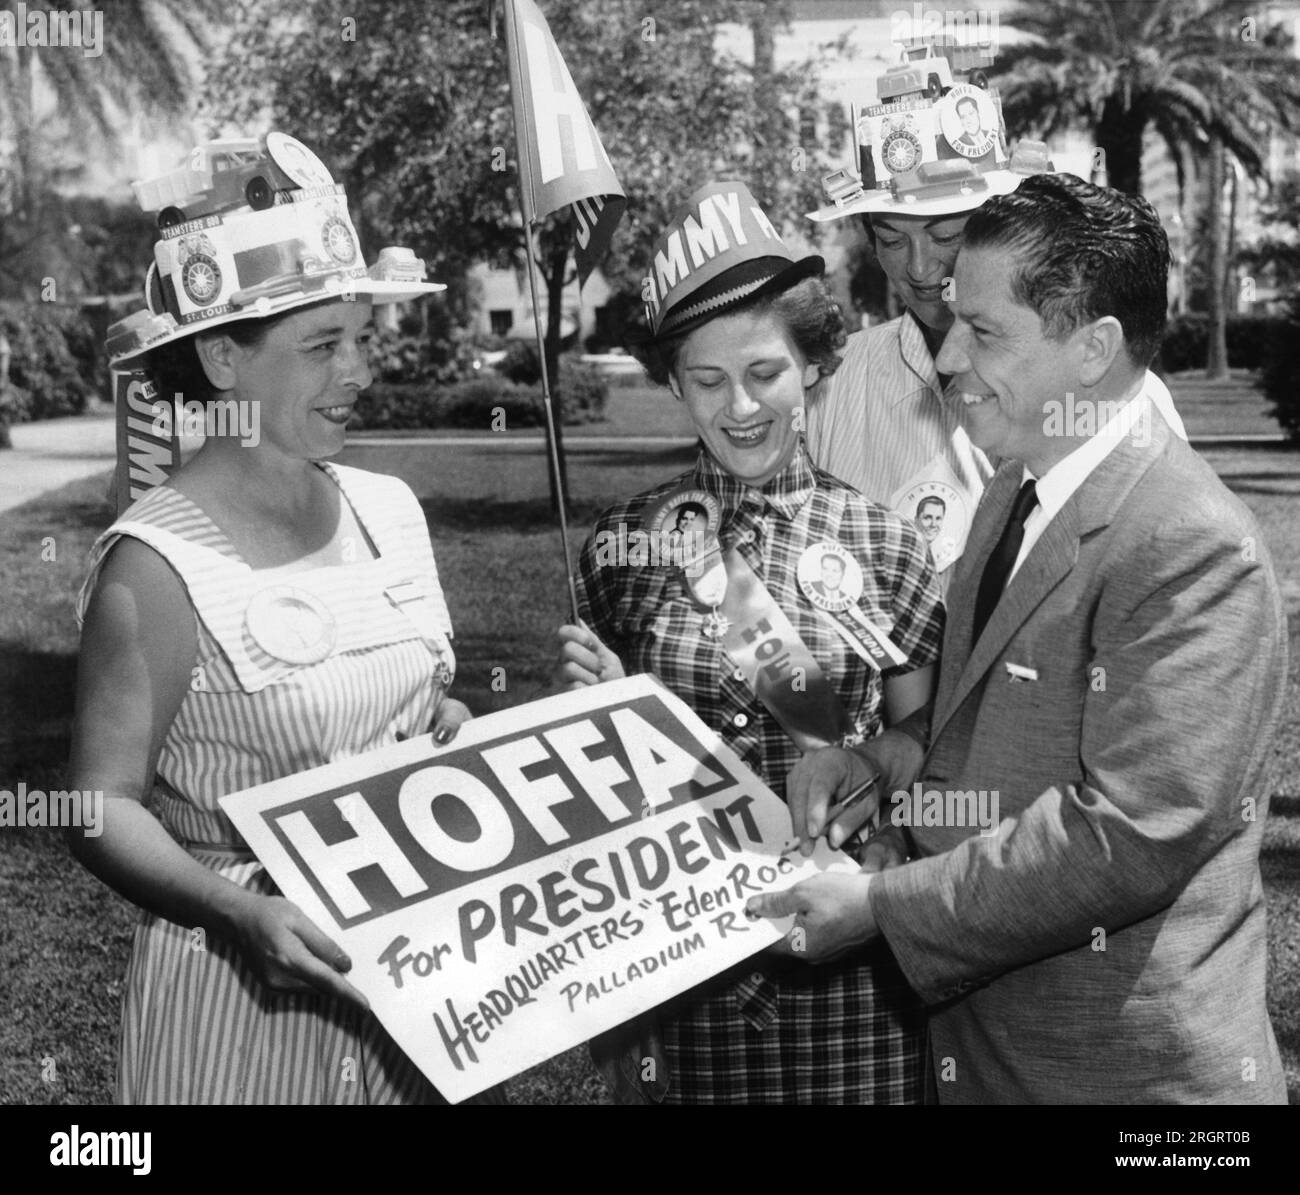 Miami Beach, Florida:  October 1, 1957 Teamsters union vice president JImmy Hoffa autographs a placard for him for a group of women campaigning for his run for president of the Teamsters. Stock Photo